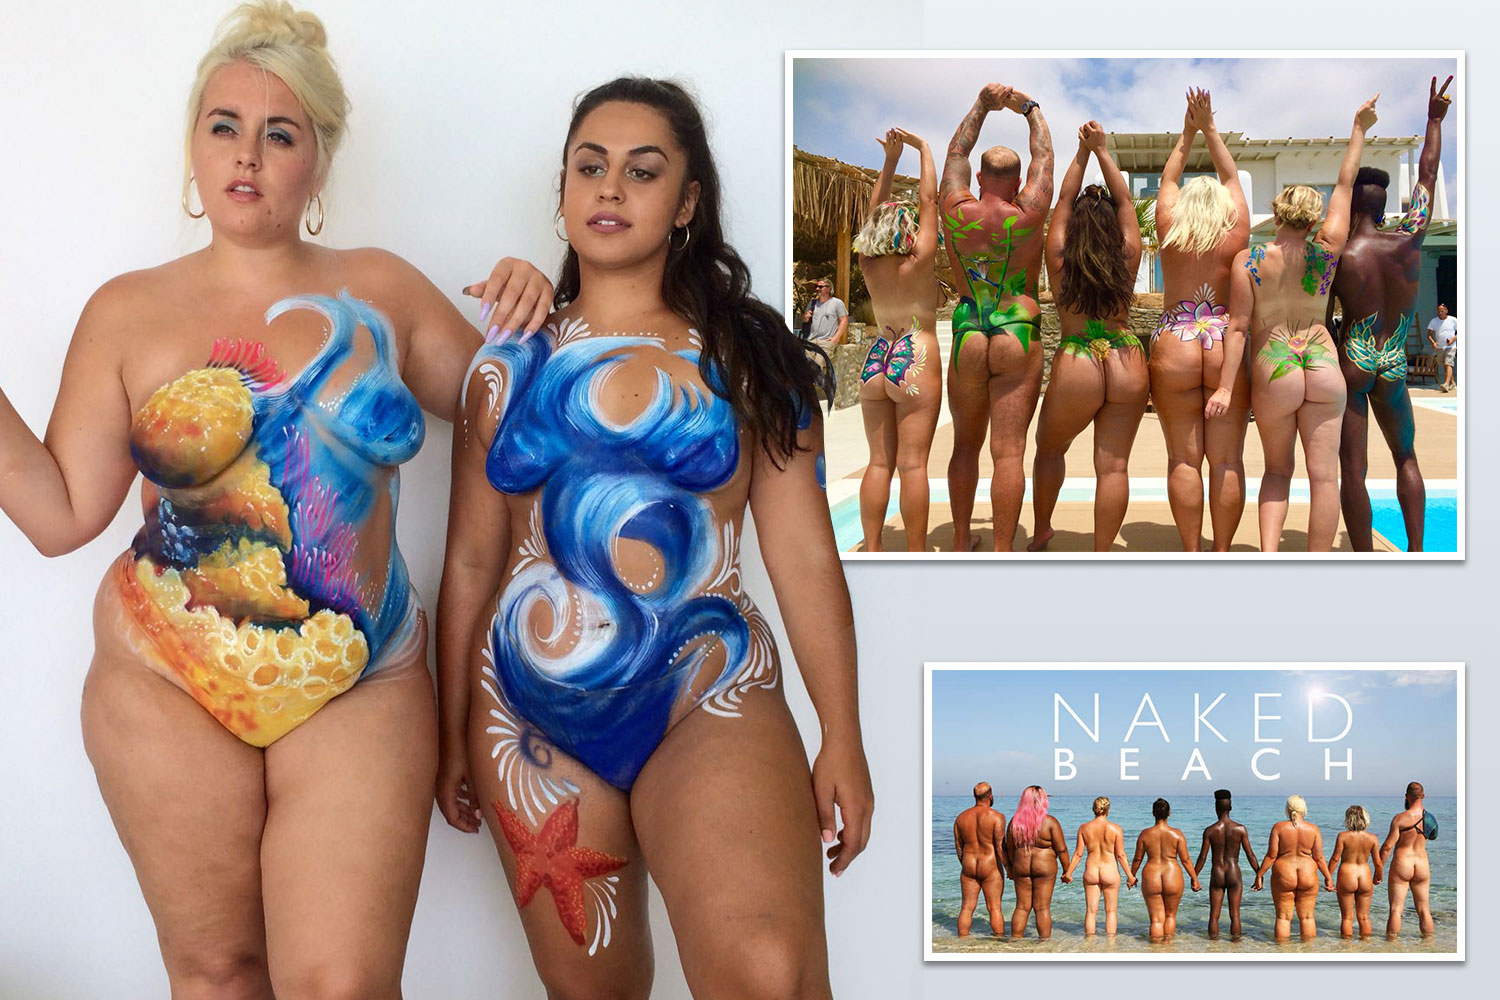 david schoff recommends plus size nude beach pic